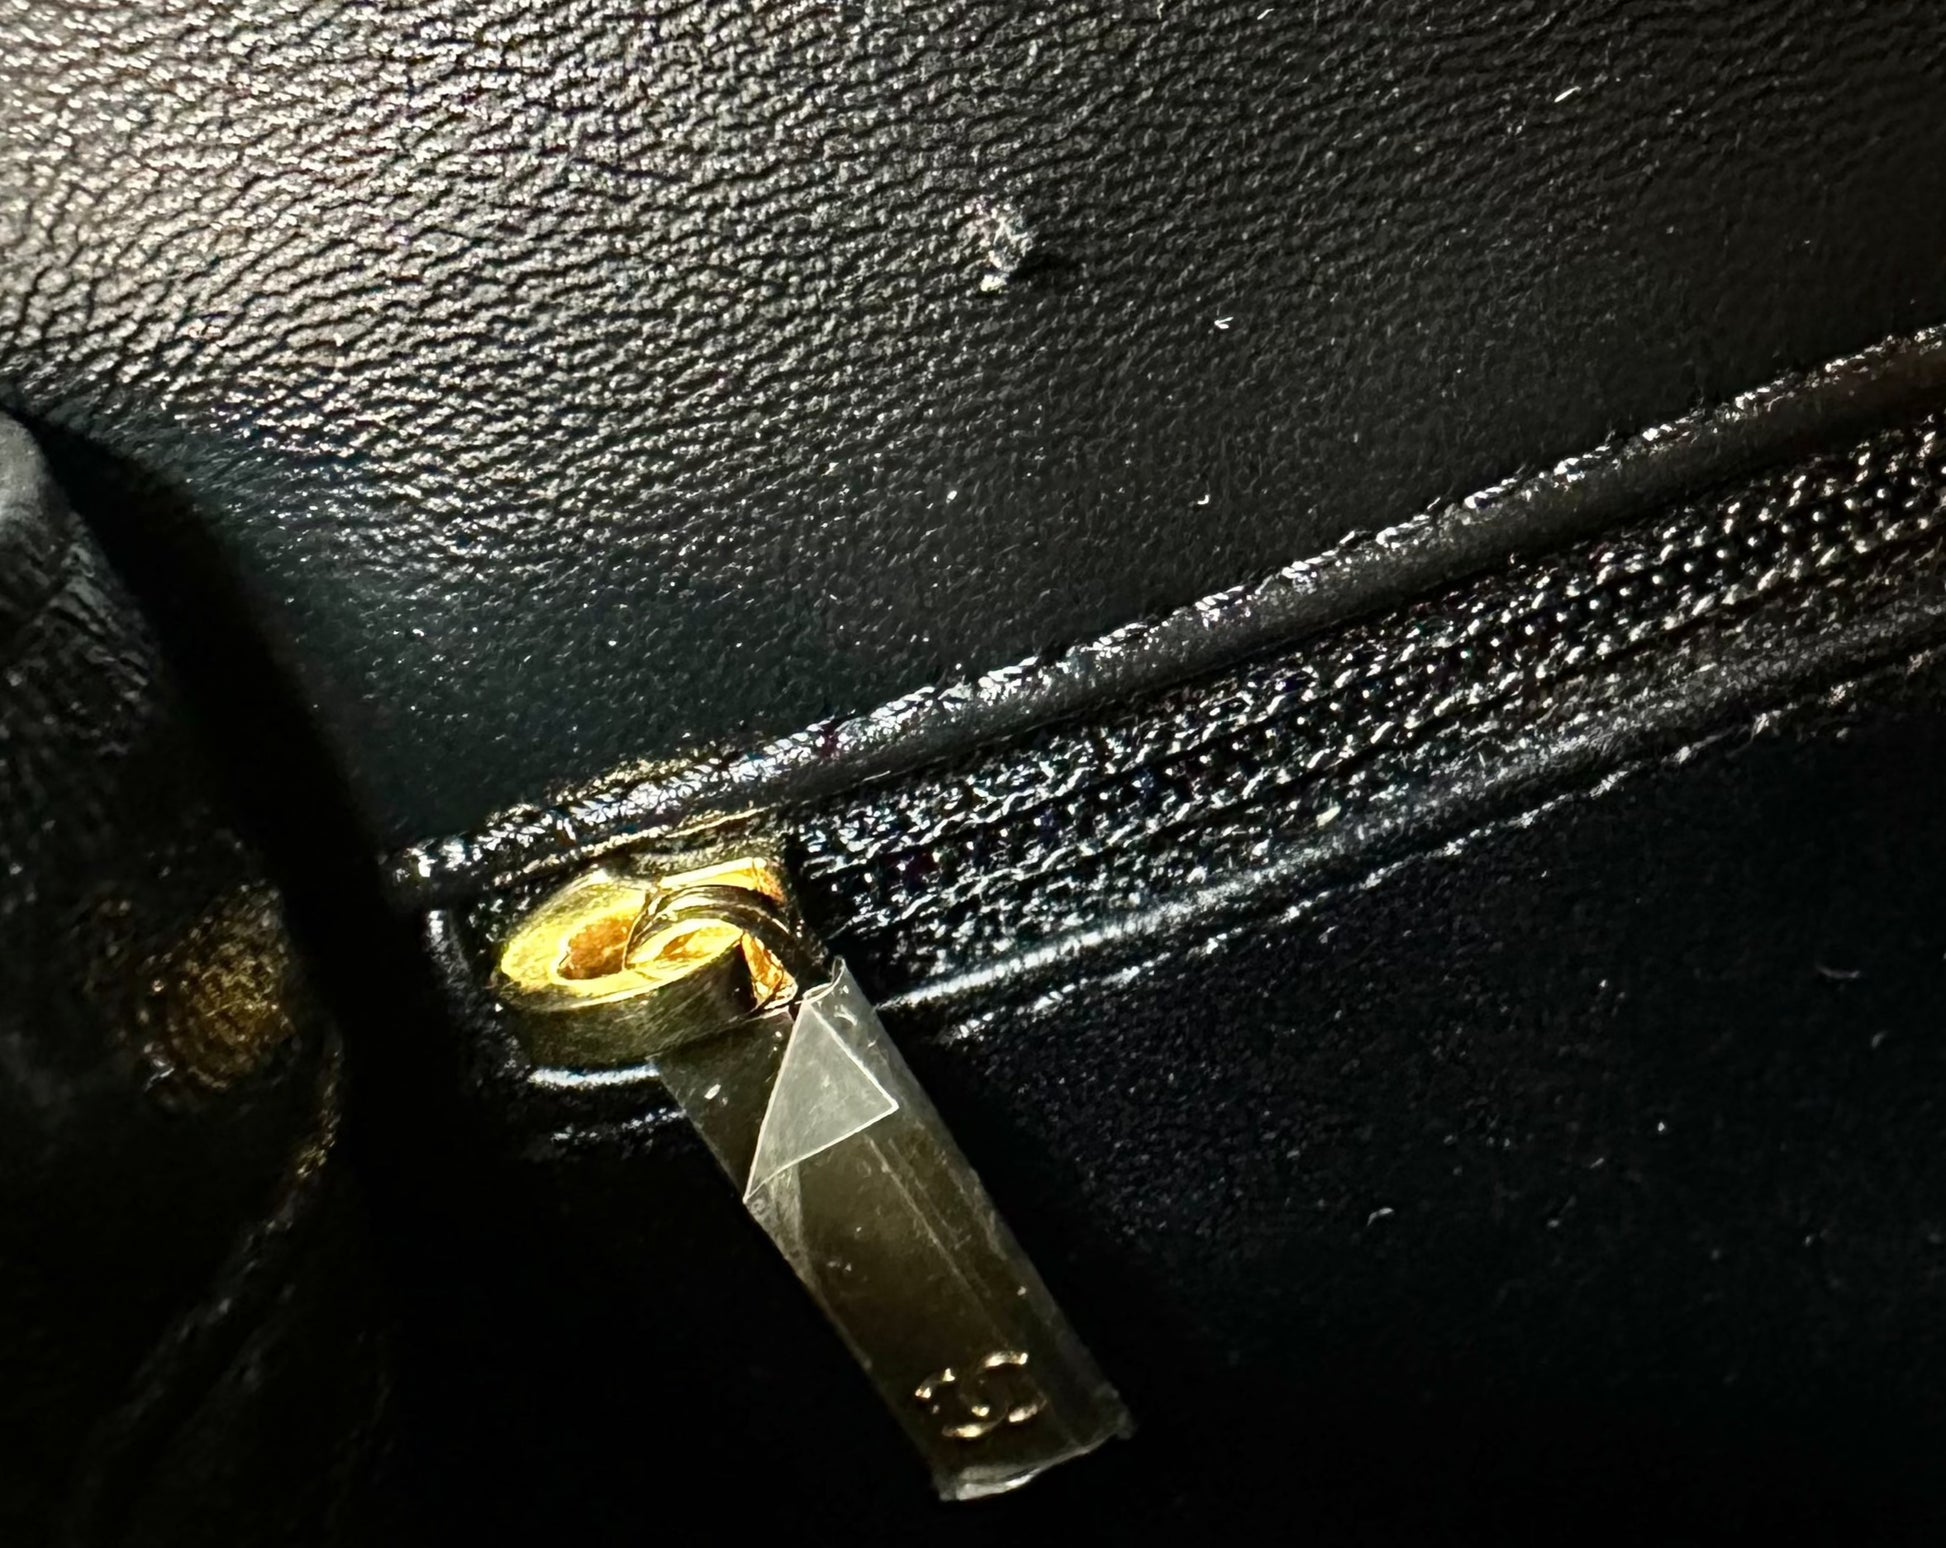 Cut on leather above interior zipper pocket